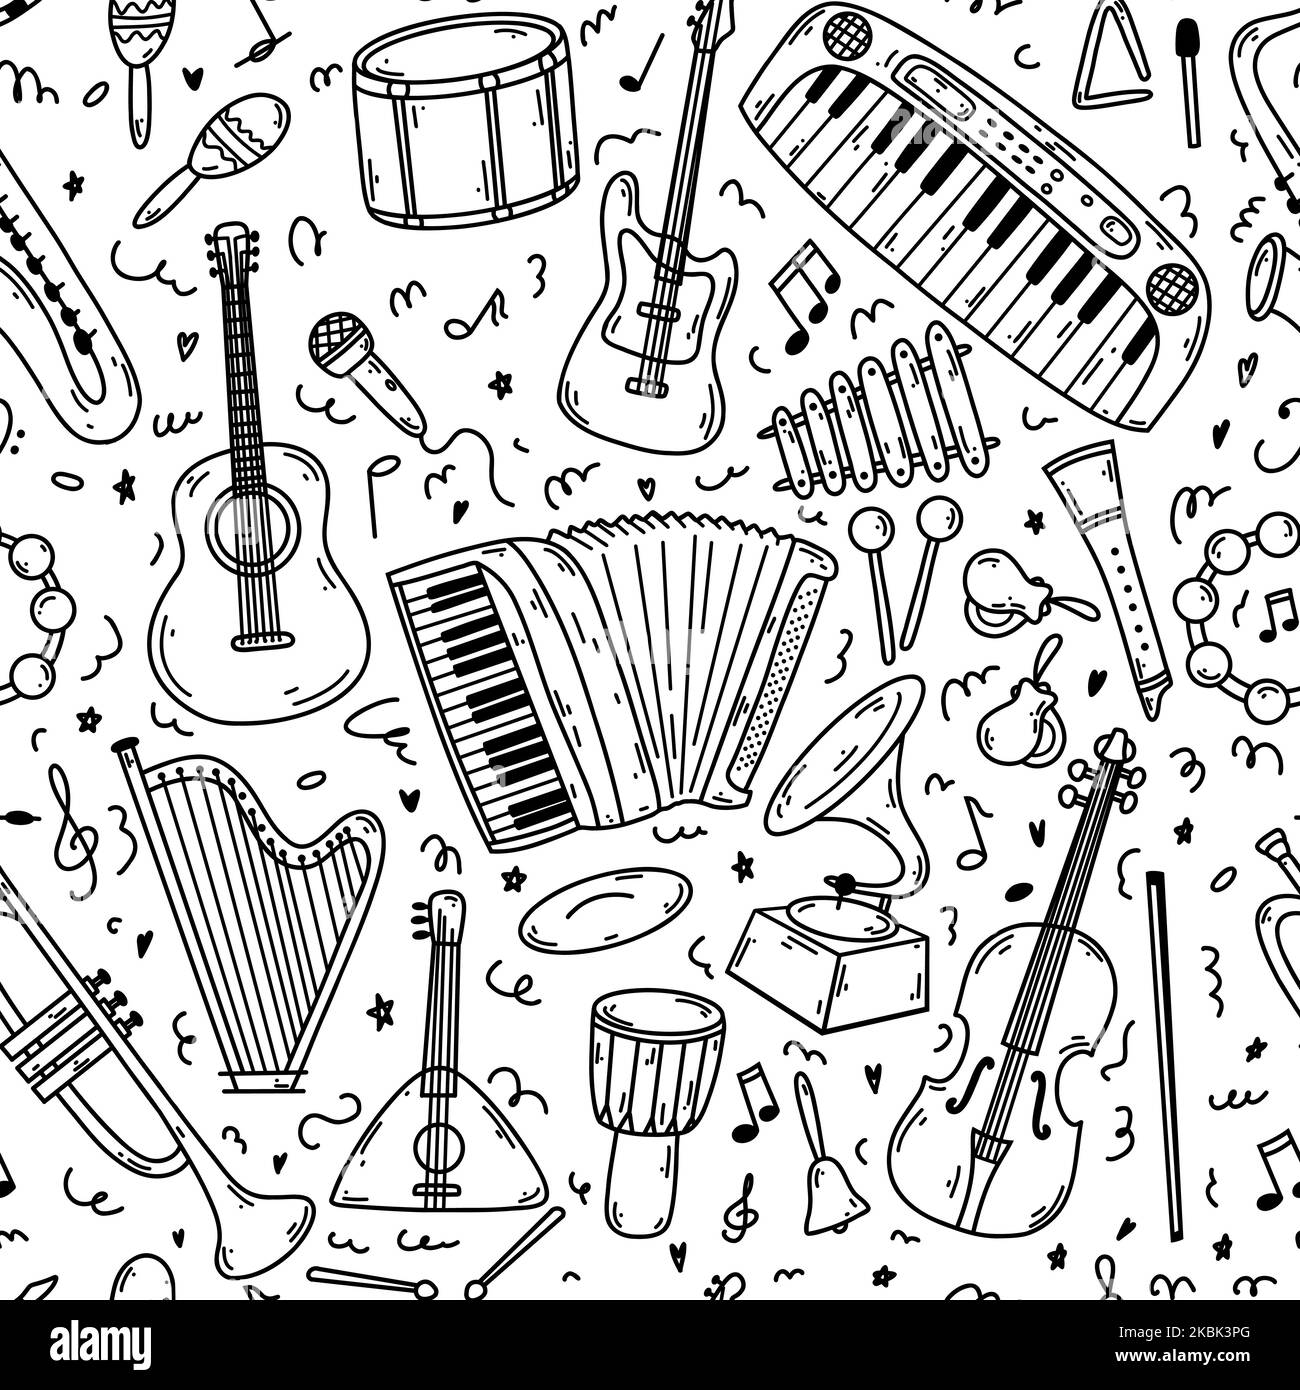 Sketch musical instruments drum harp flute synthesizer accordion guitar  trumpet cello music vintage outline hand drawn  CanStock